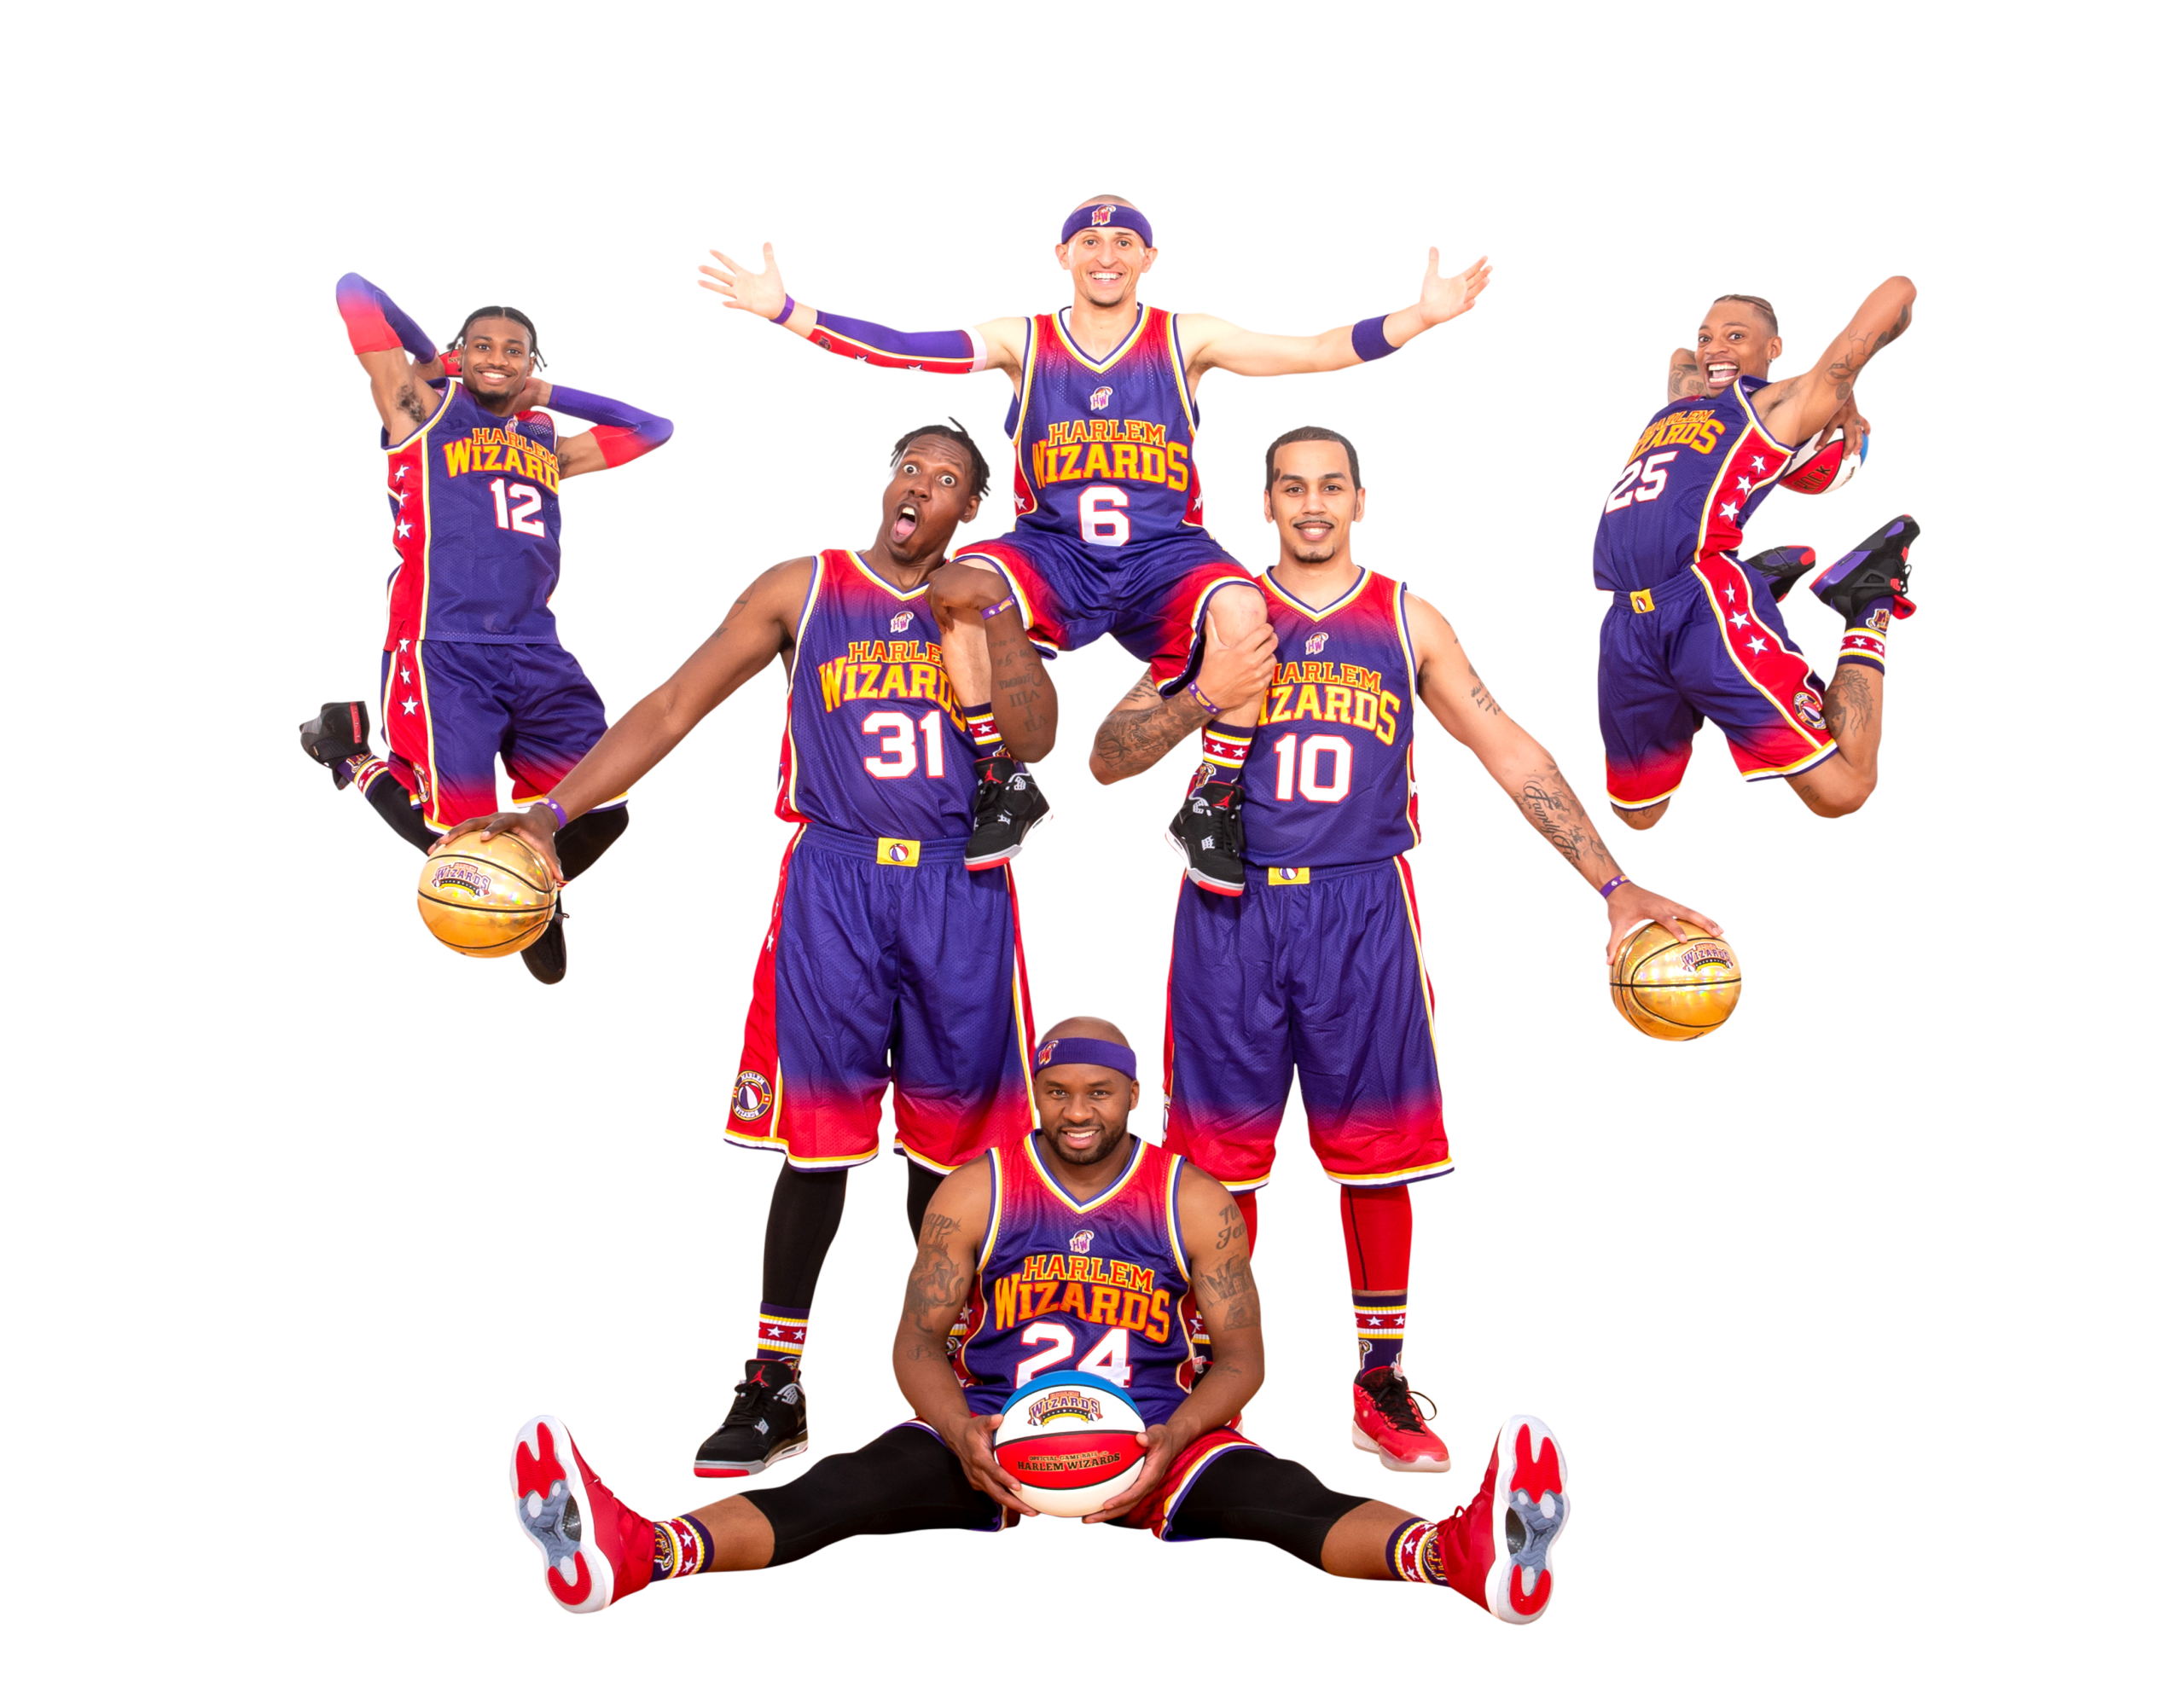 Media Area - The World Famous Harlem Wizards